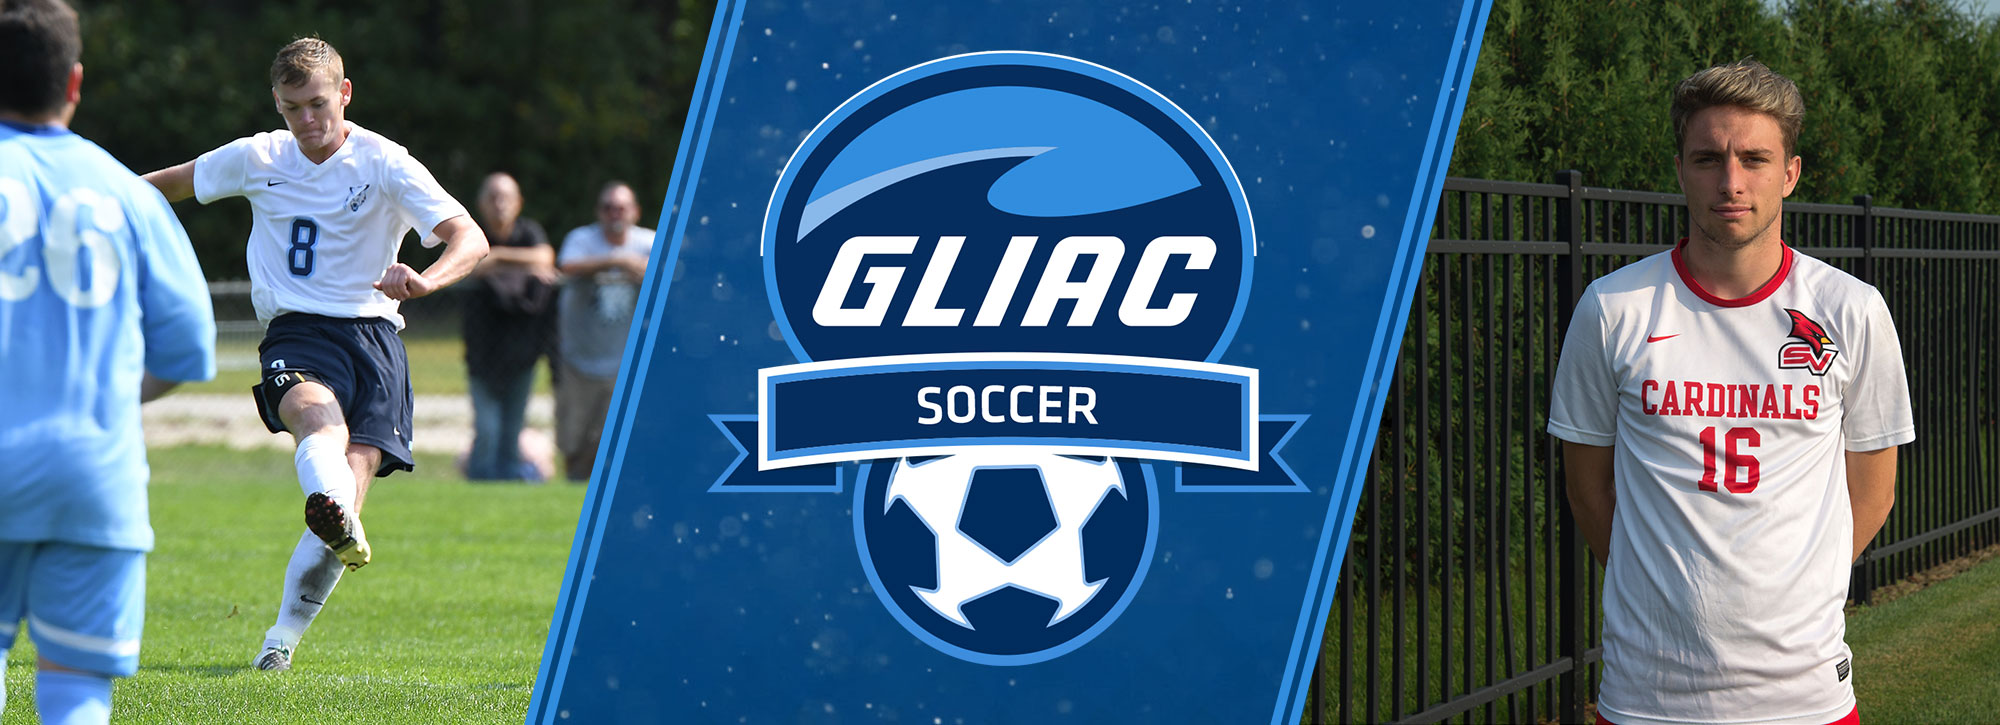 Northwood's Stacey, Saginaw Valley's Wright Collect GLIAC Men's Soccer Weekly Honors